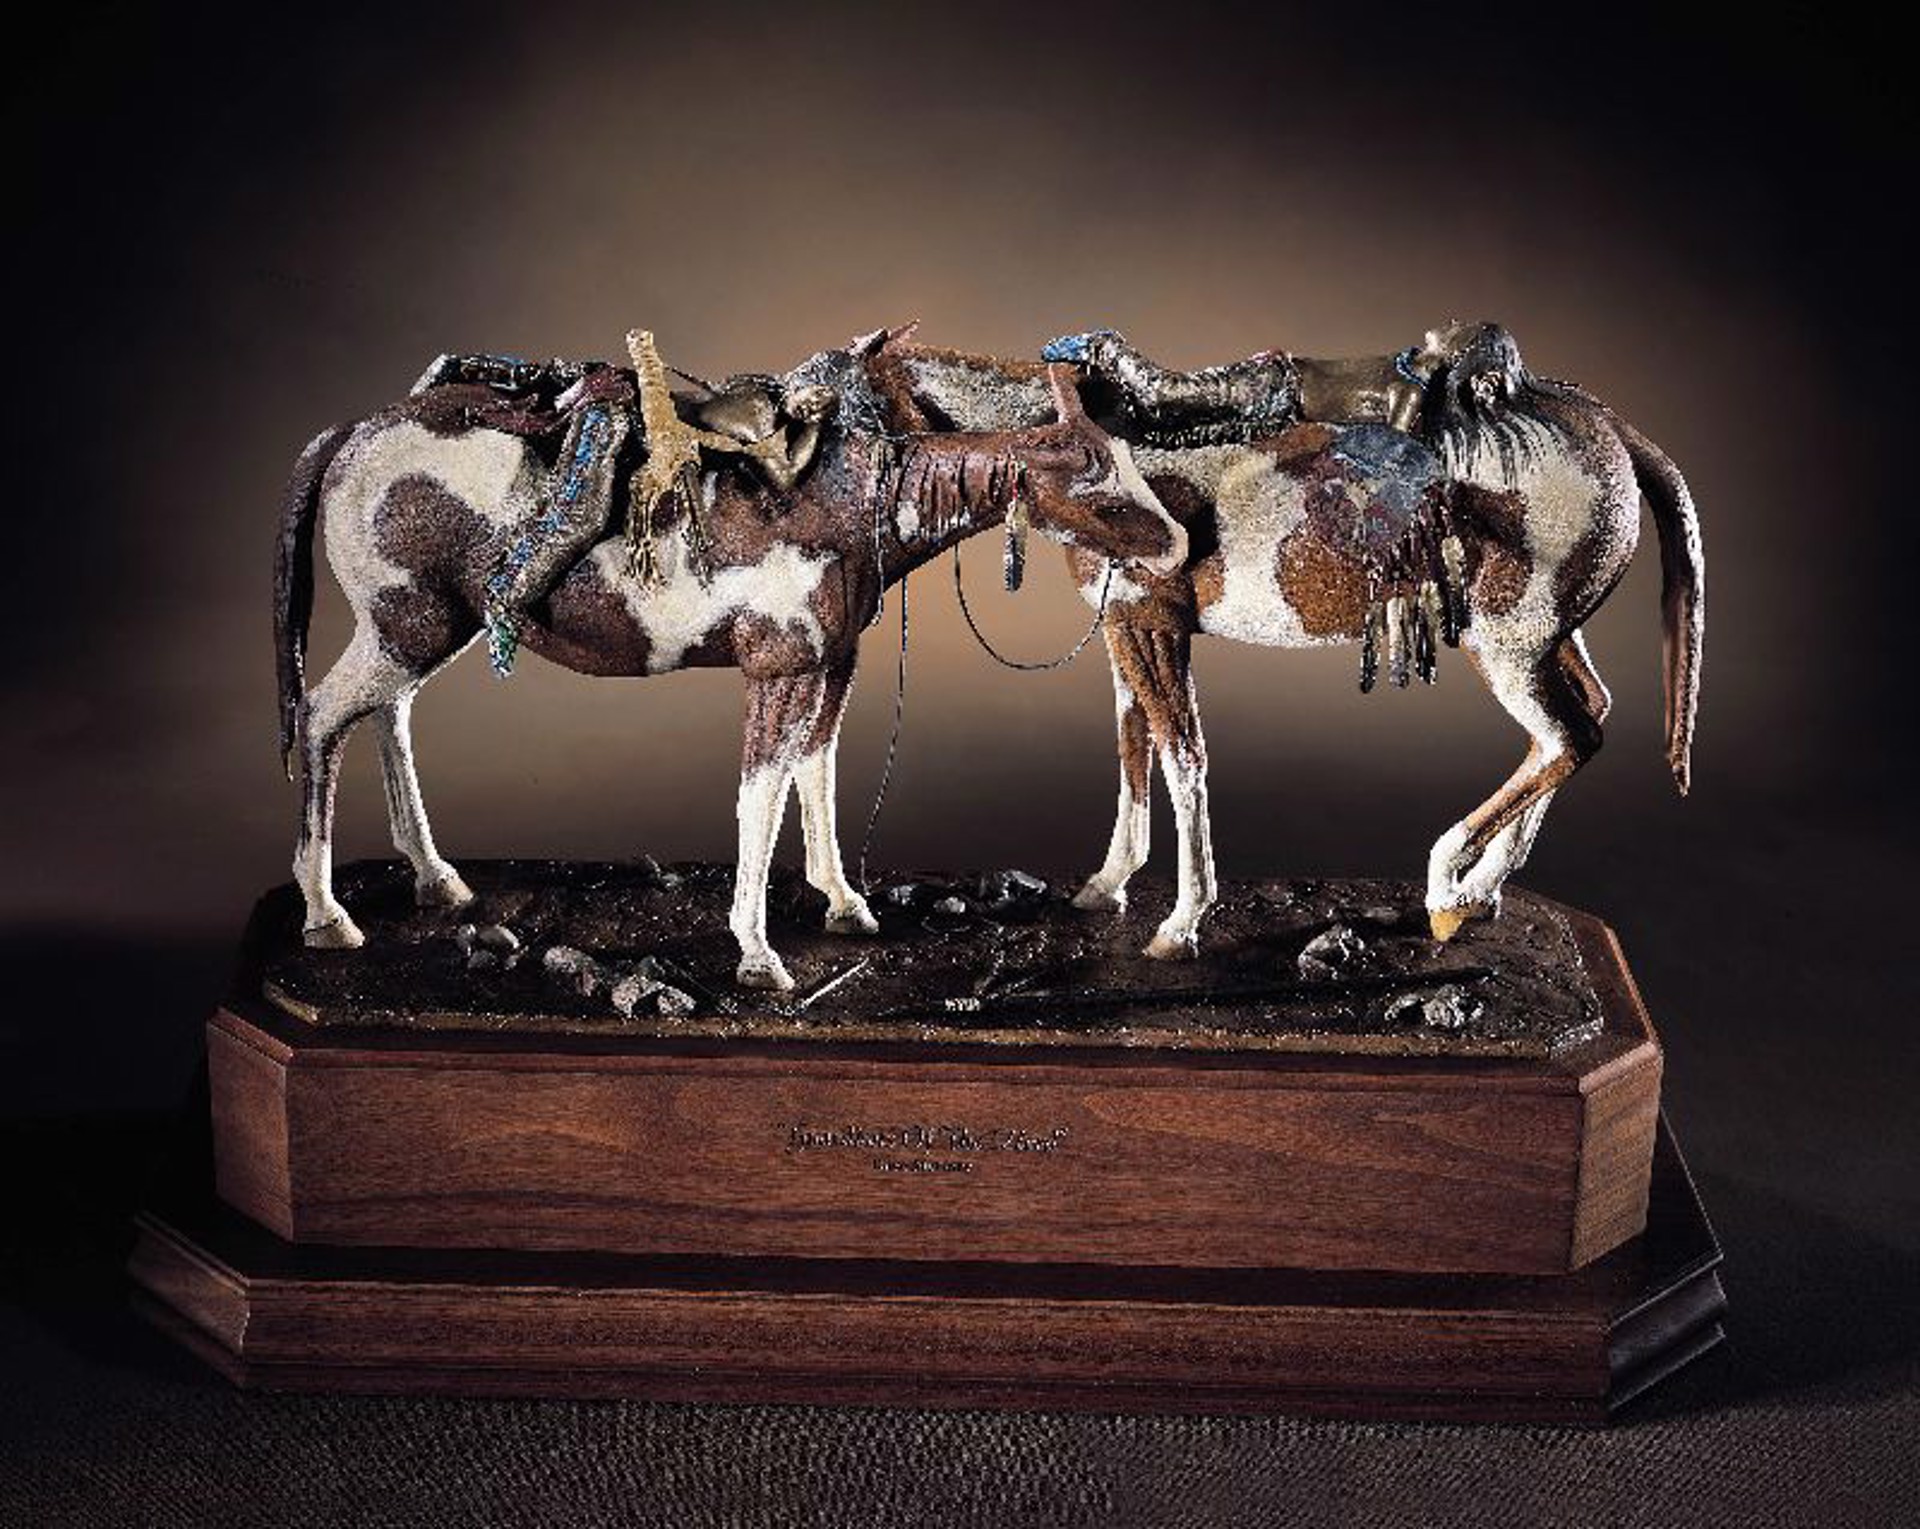 Guardians of the Herd by Dave McGary (sculptor) (1958-2013)